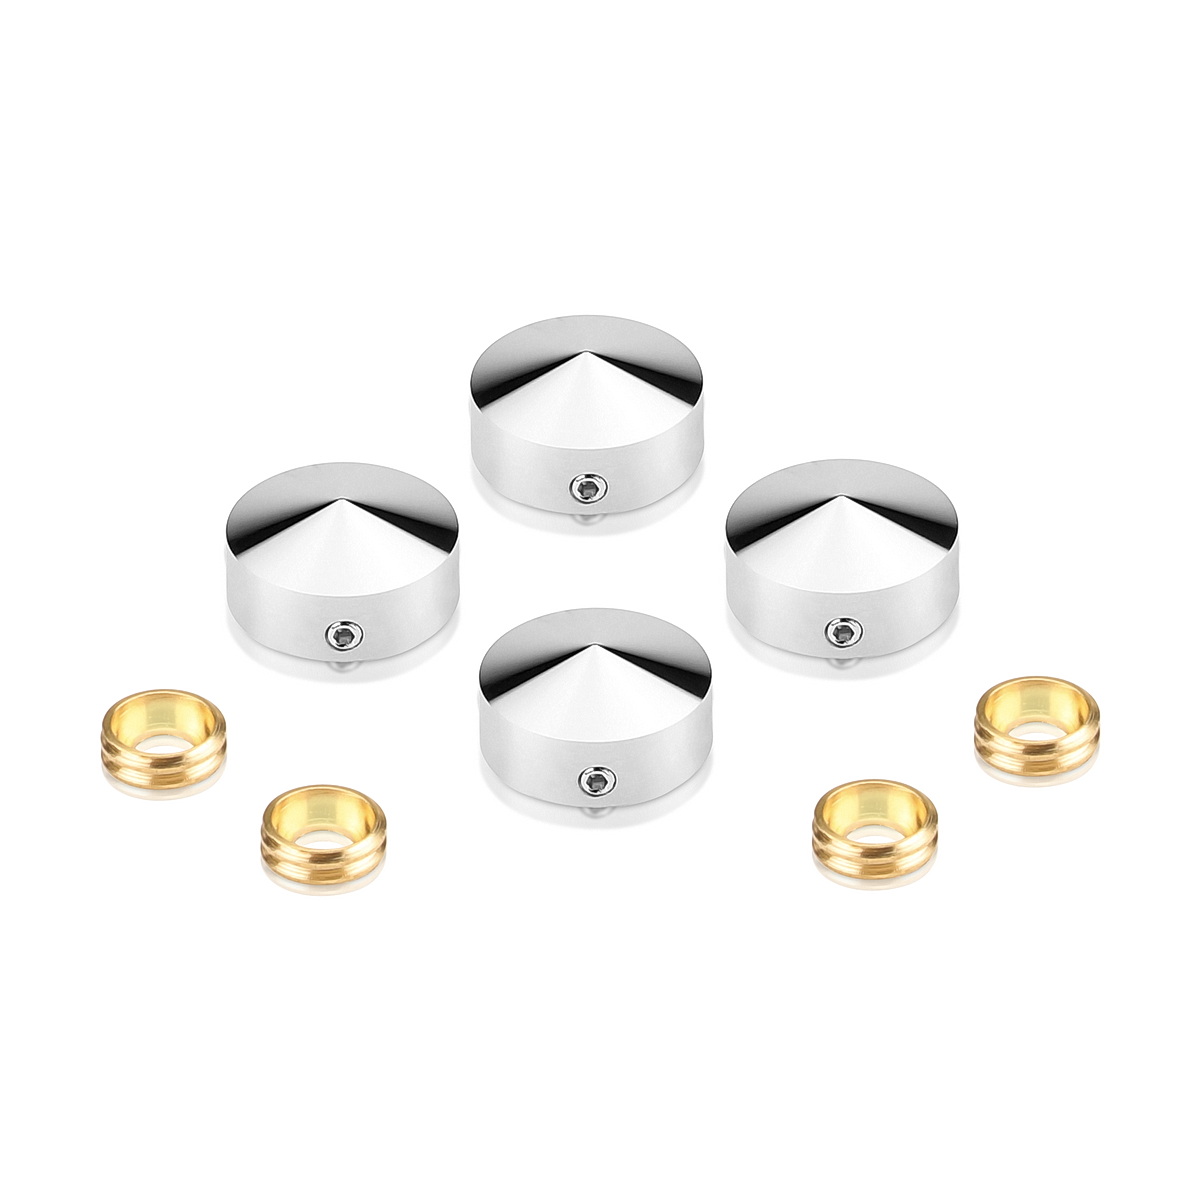 Set of 4 Conical Locking Screw Cover Diameter 11/16'', Satin Brushed Stainless Steel Finish (Indoor or Outdoor)